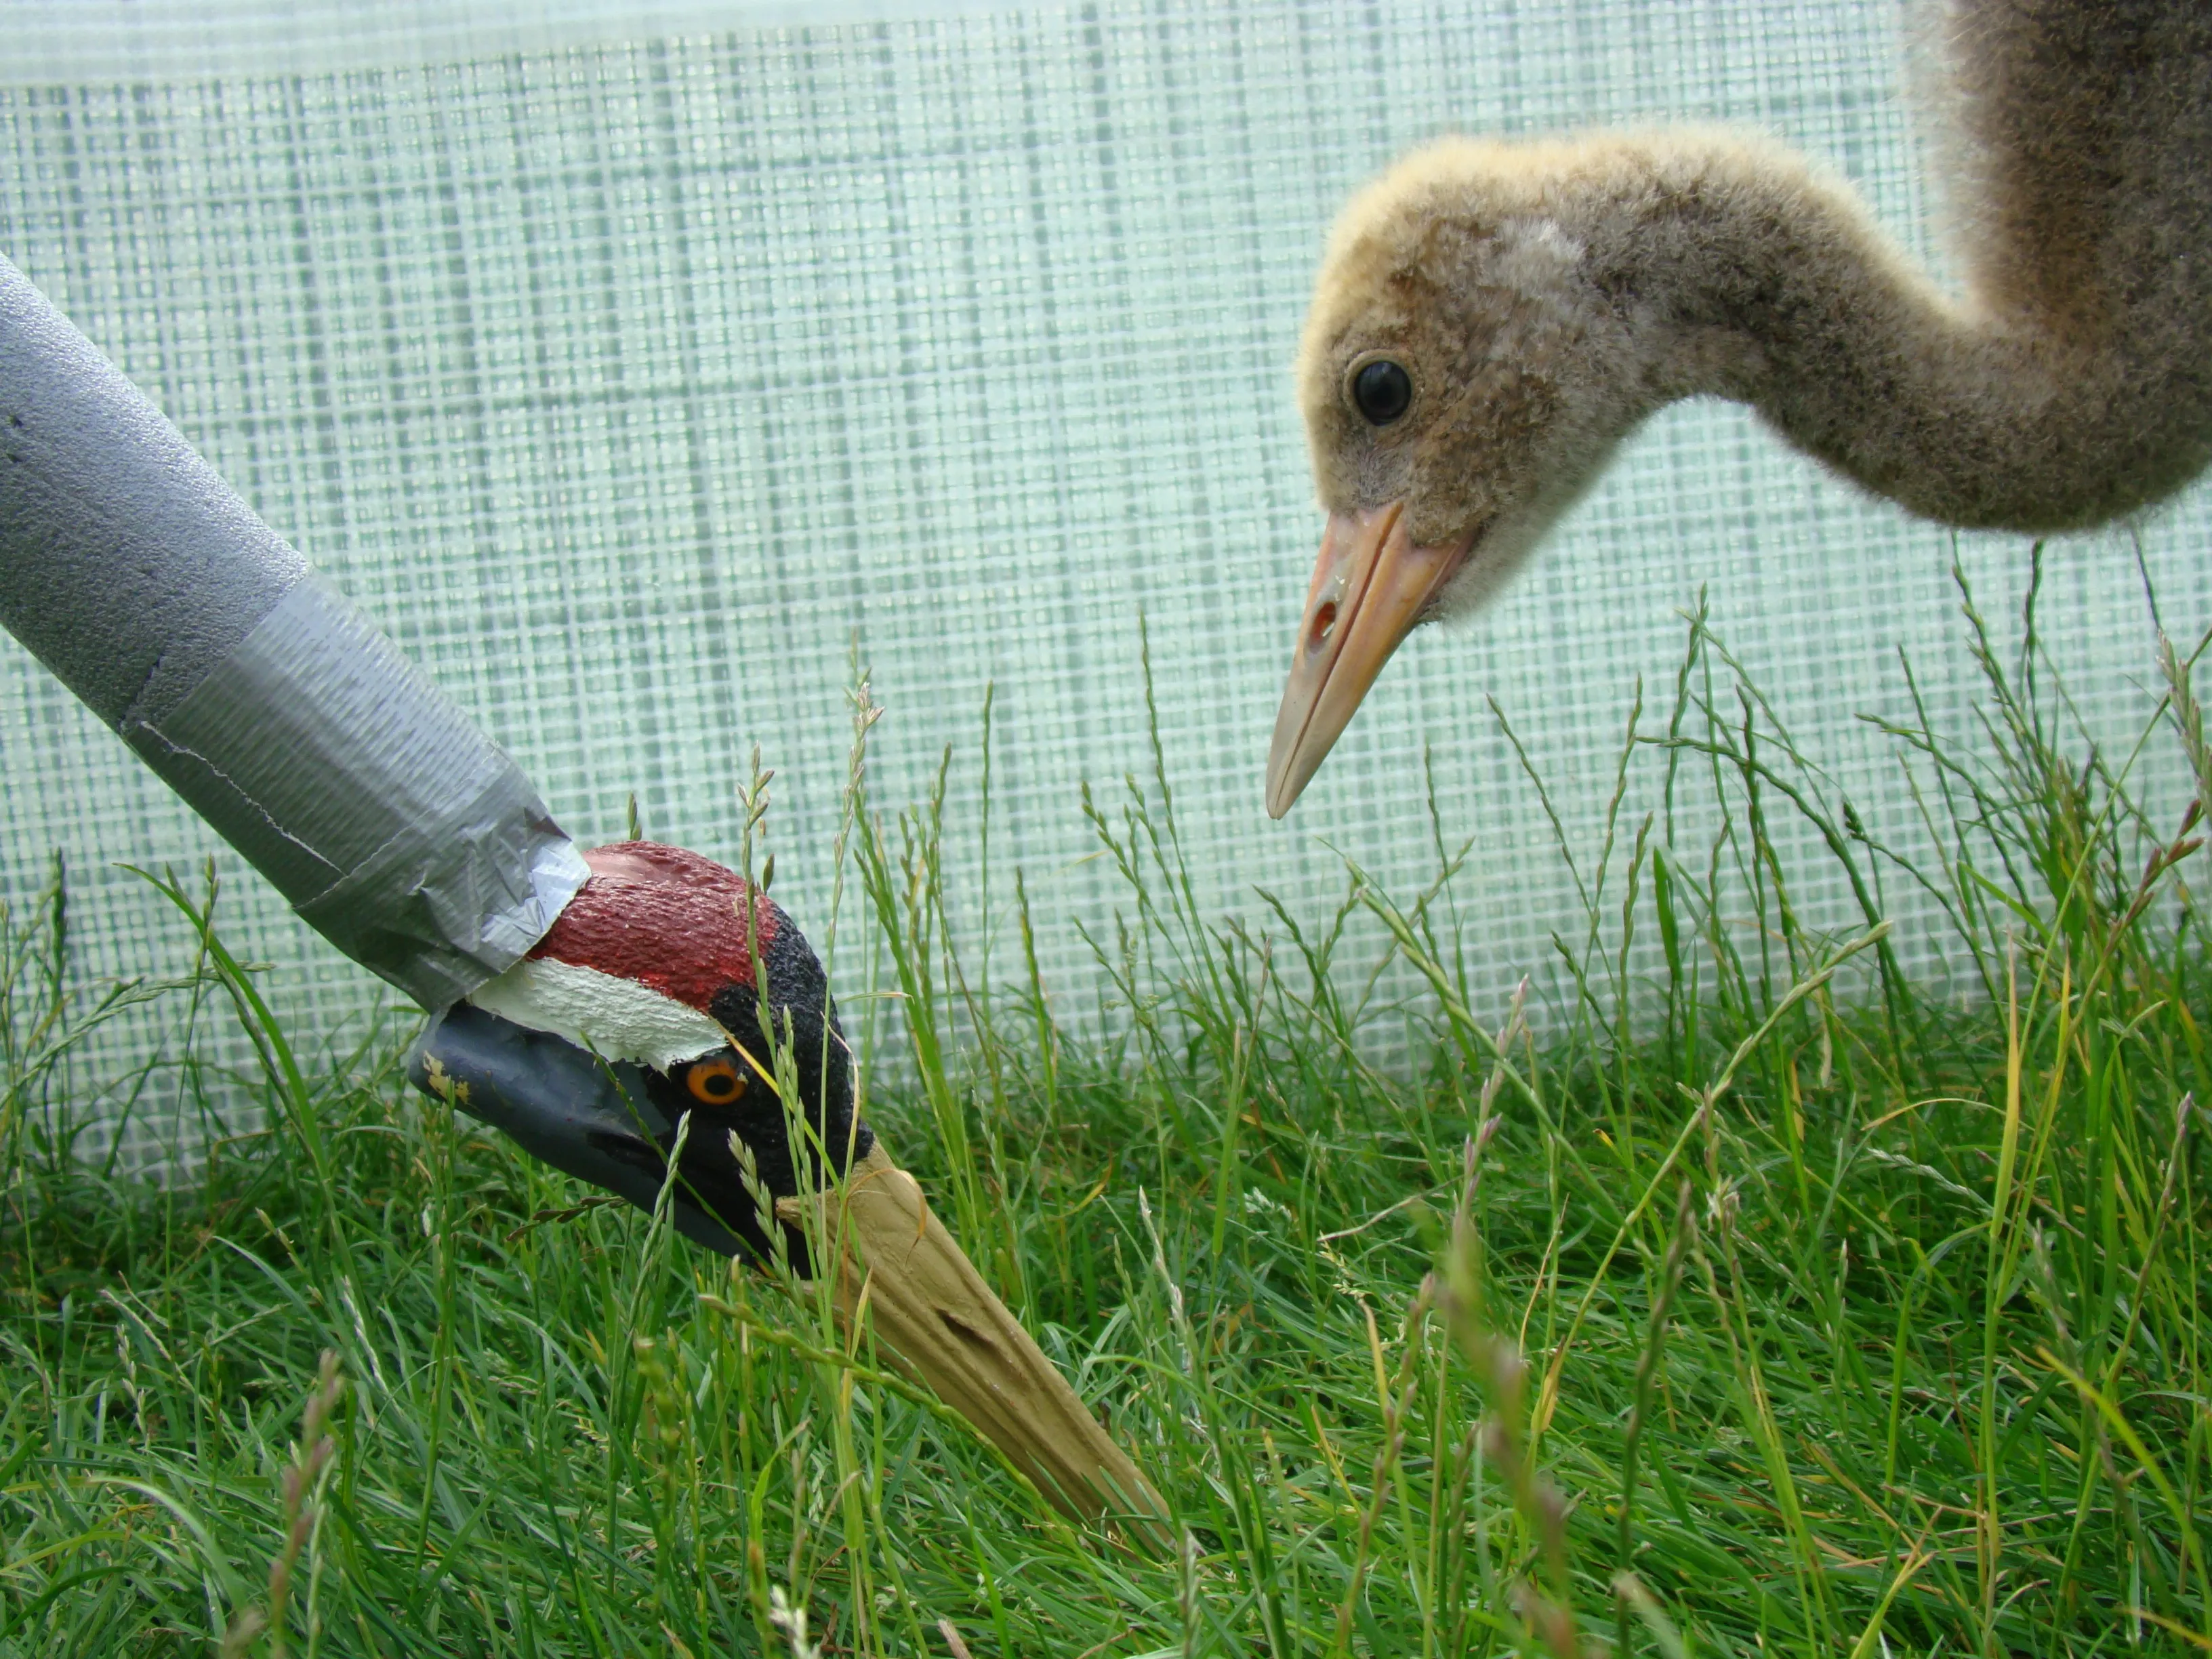 Crane chick learning with a rearing puppet on the grass.